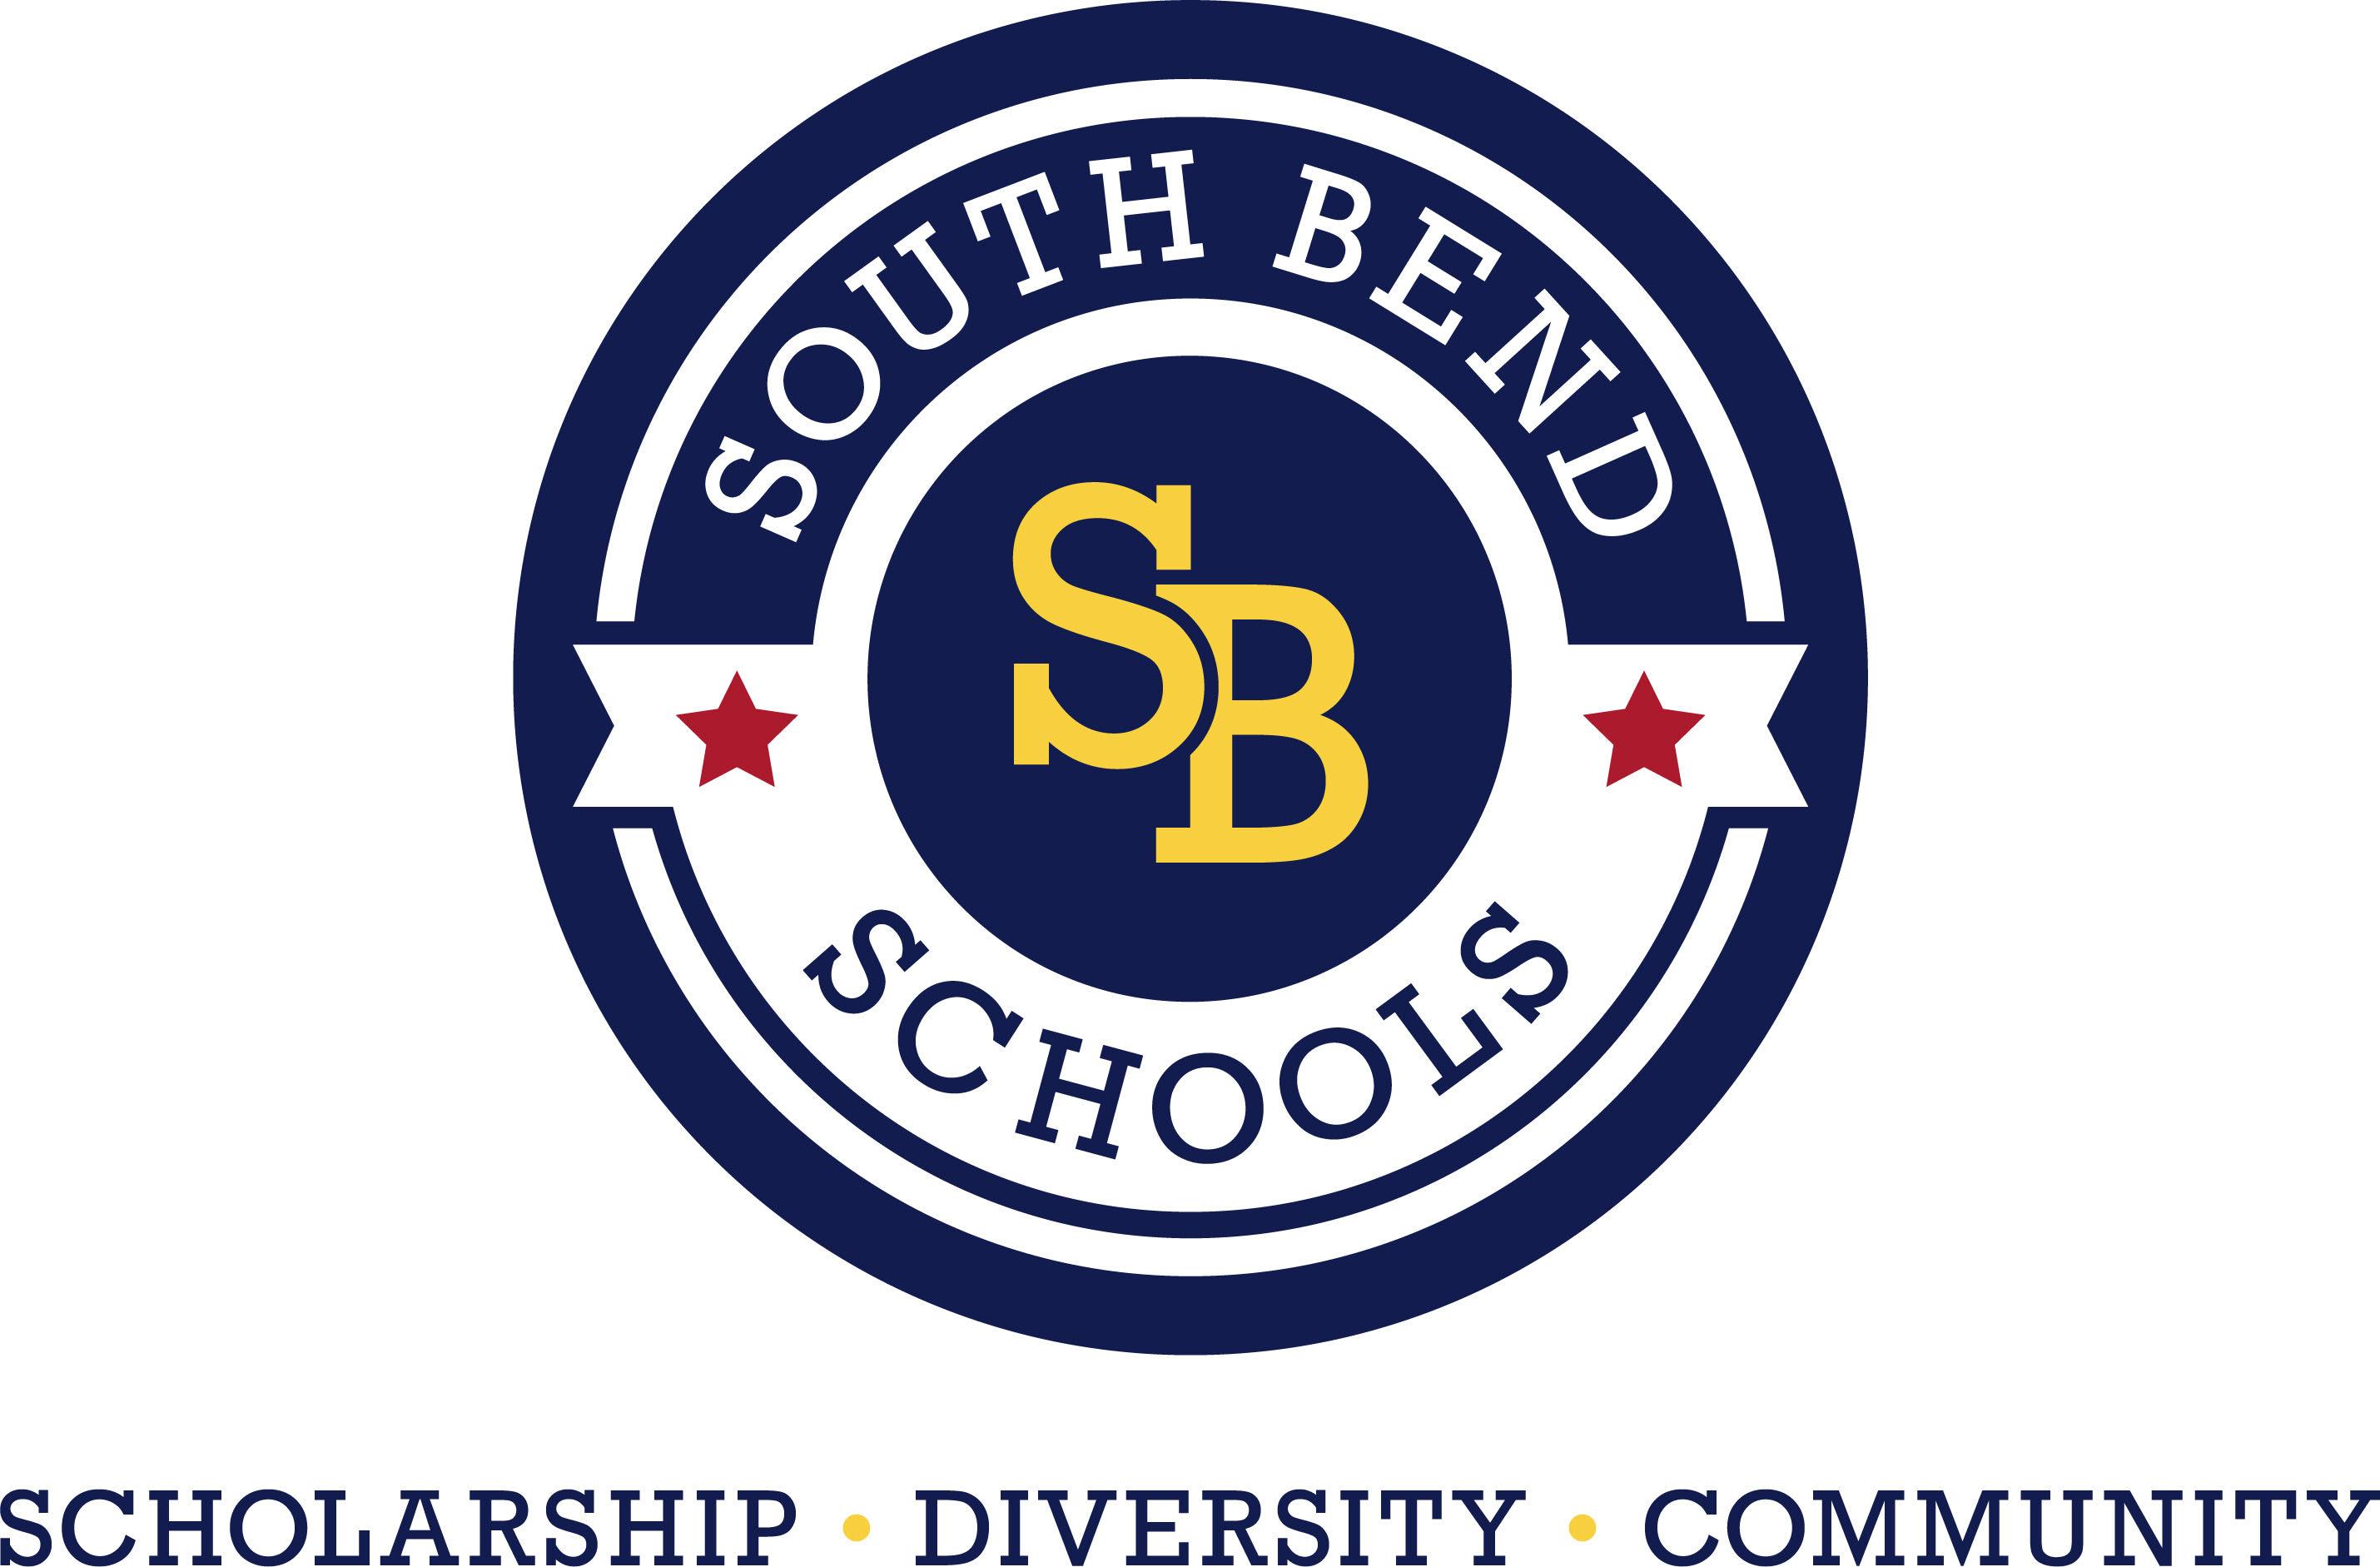 South Bend Logo - South Bend Education Foundation | A Caring Community, Learning Together